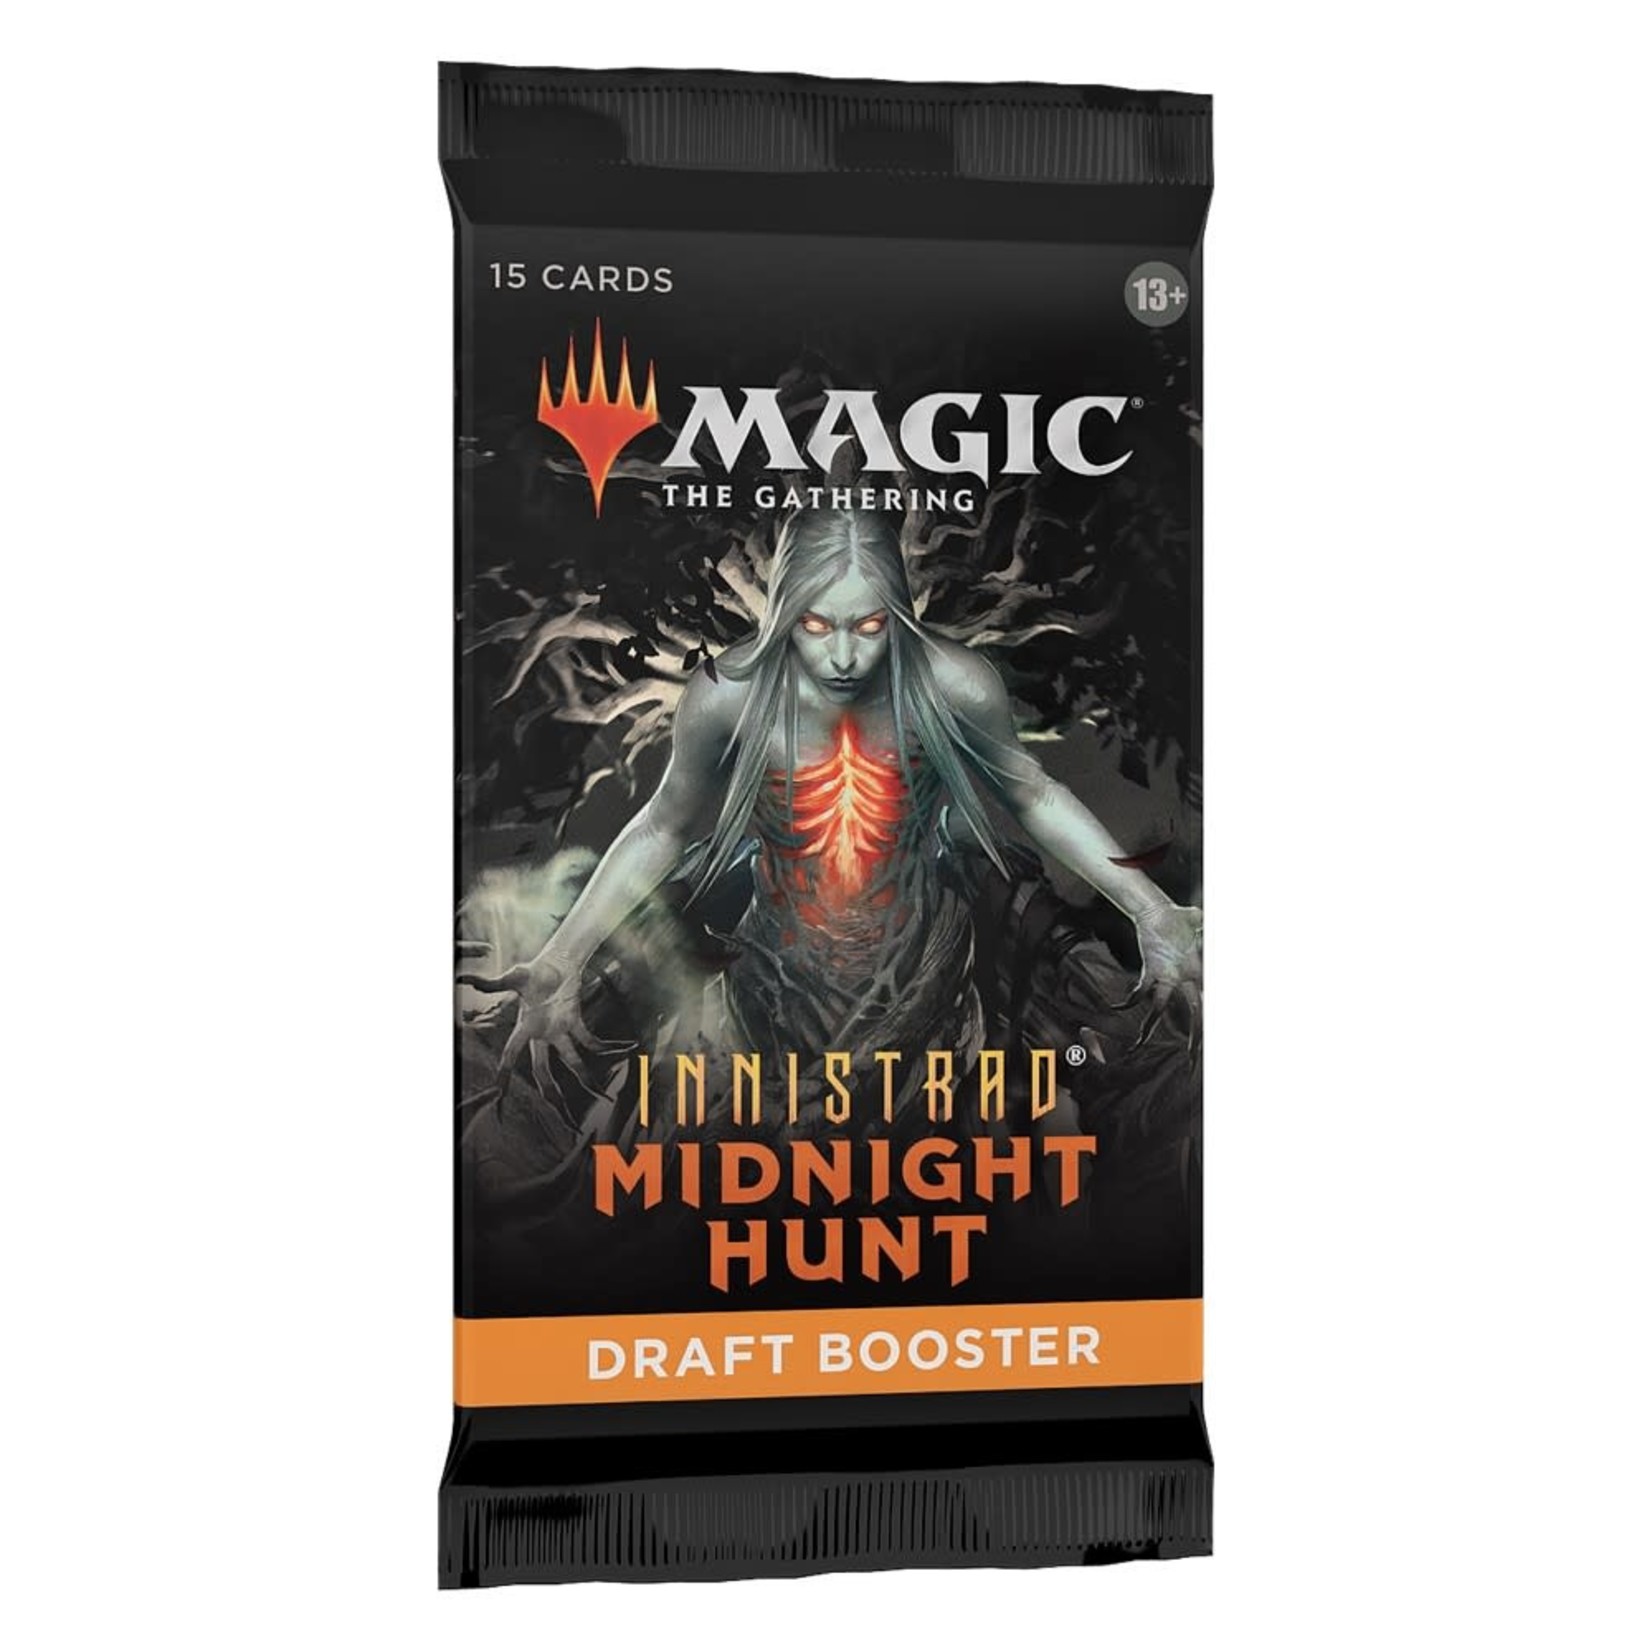 Wizards of the Coast Magic the Gathering Innistrad Midnight Hunt MID Draft Booster PACK